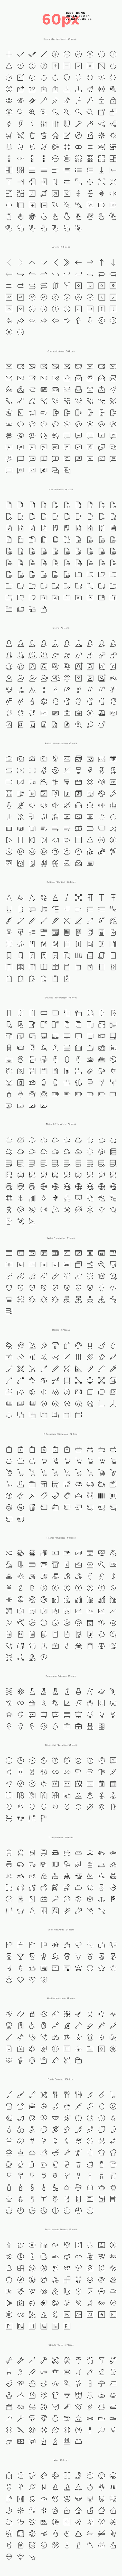 Simple Line Icons Pro in Simple Icons - product preview 4